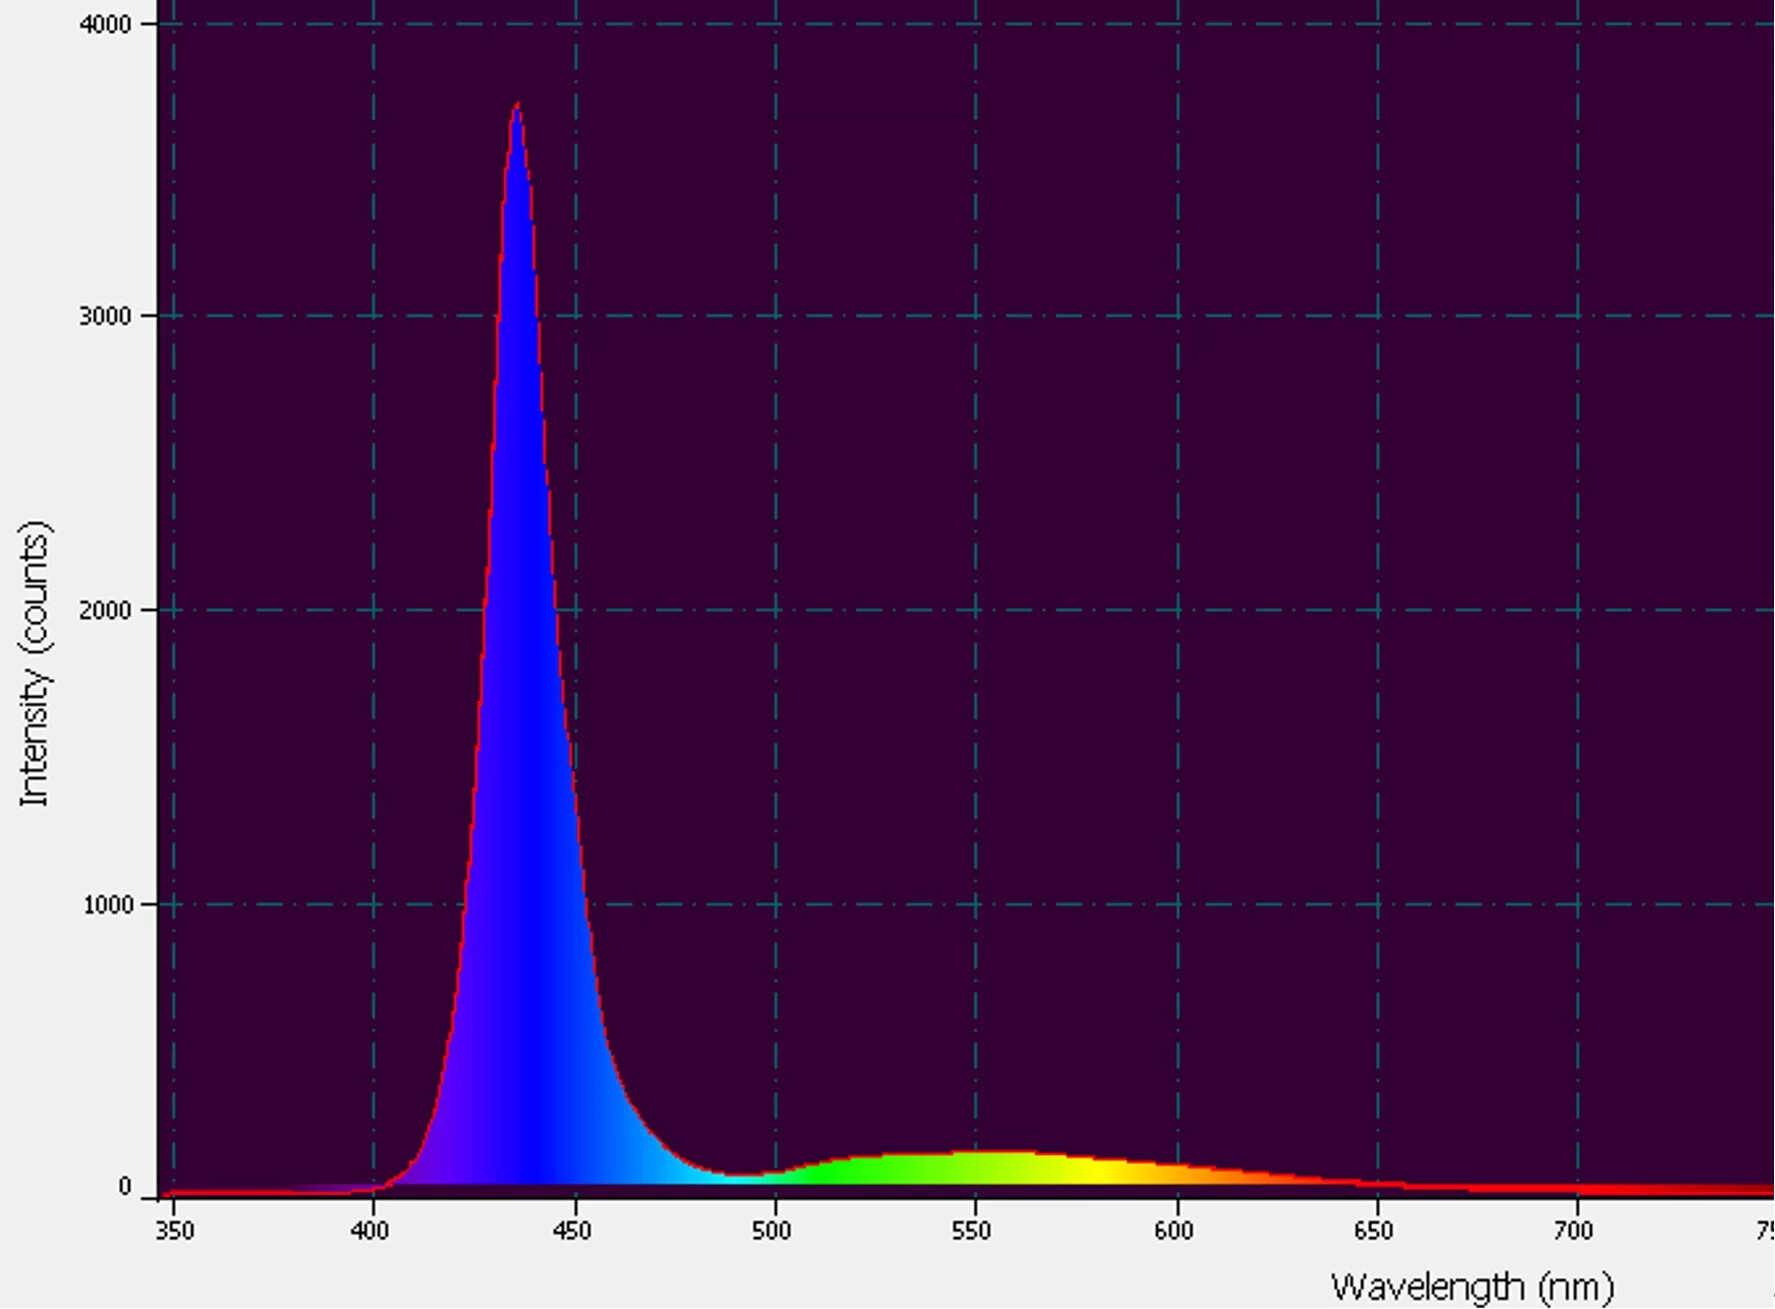 Figure 9. Spectral quality of the 430nm LED.